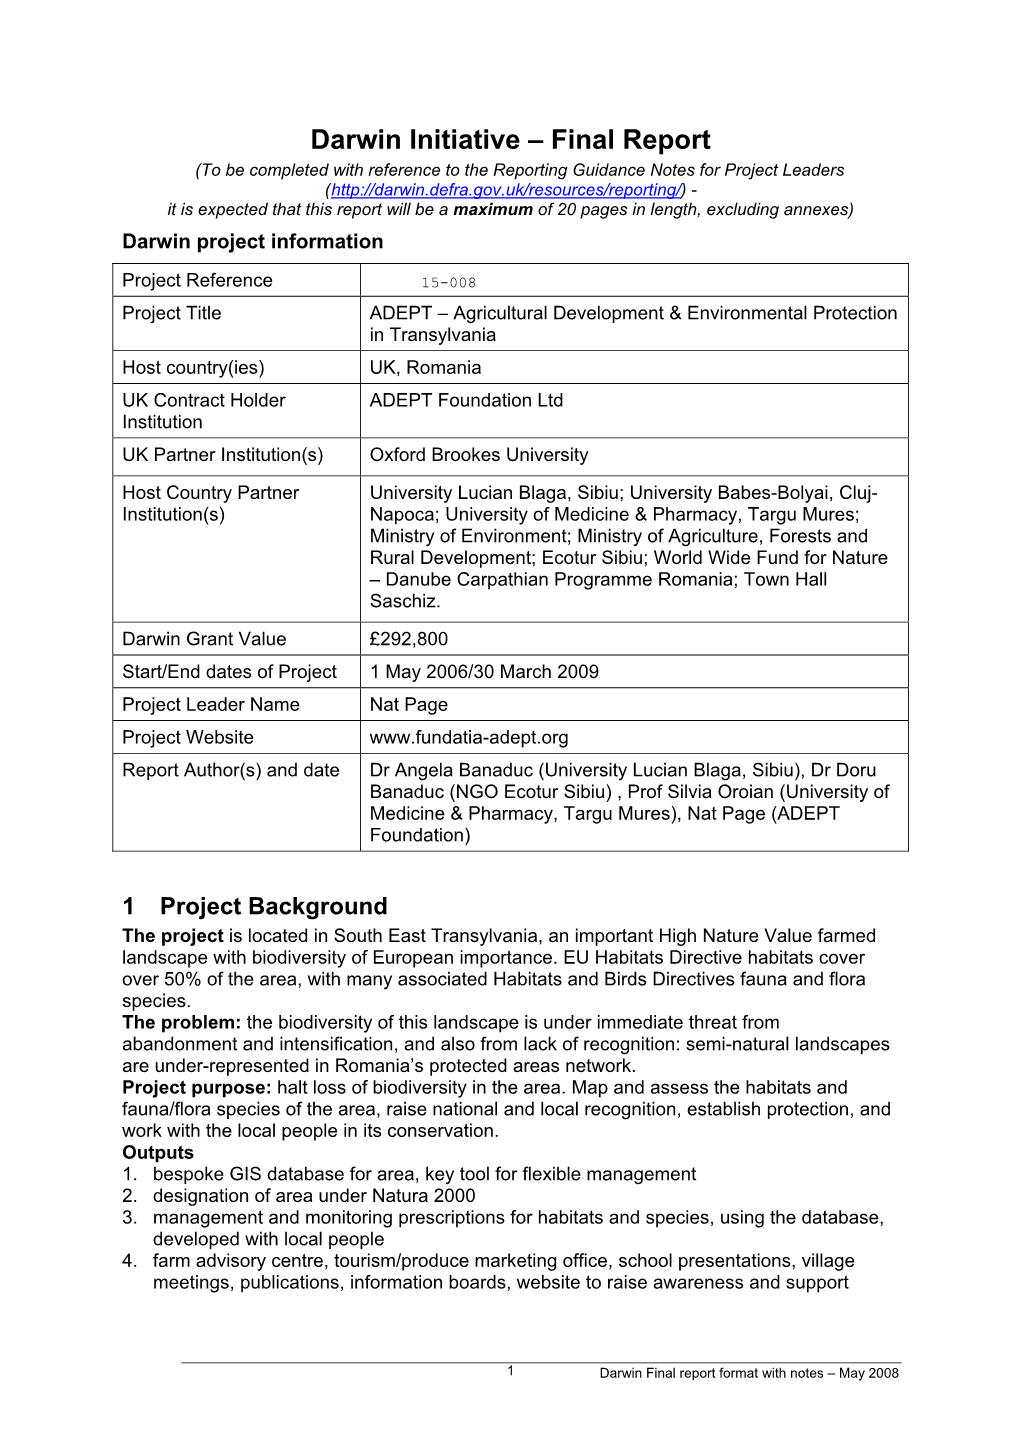 Final Report (To Be Completed with Reference to the Reporting Guidance Notes for Project Leaders